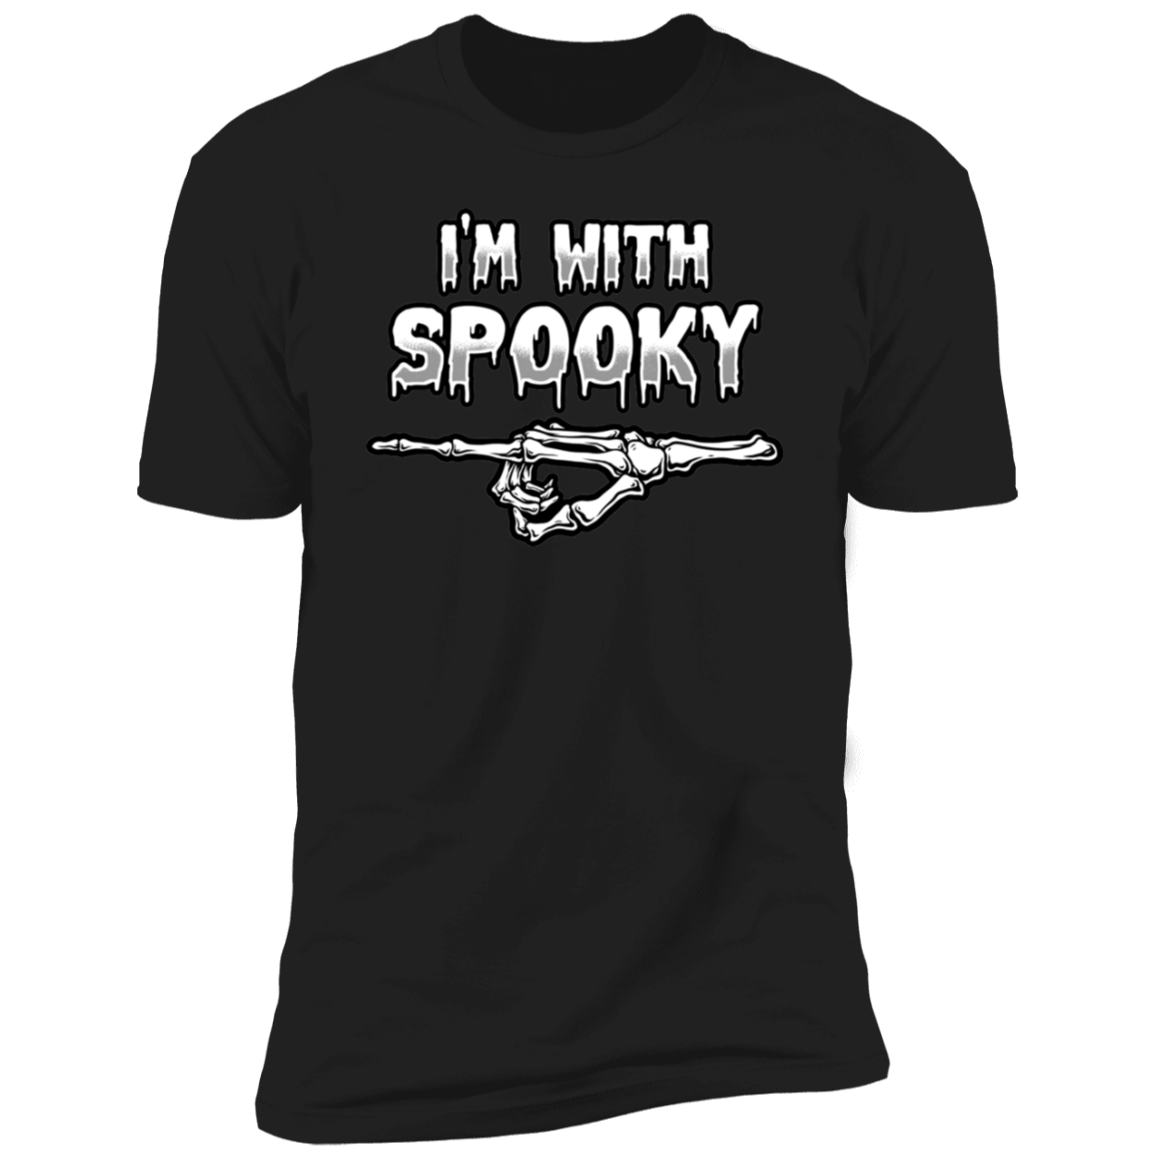 I'm With Creepy & I'm With Spooky Couples Shirts